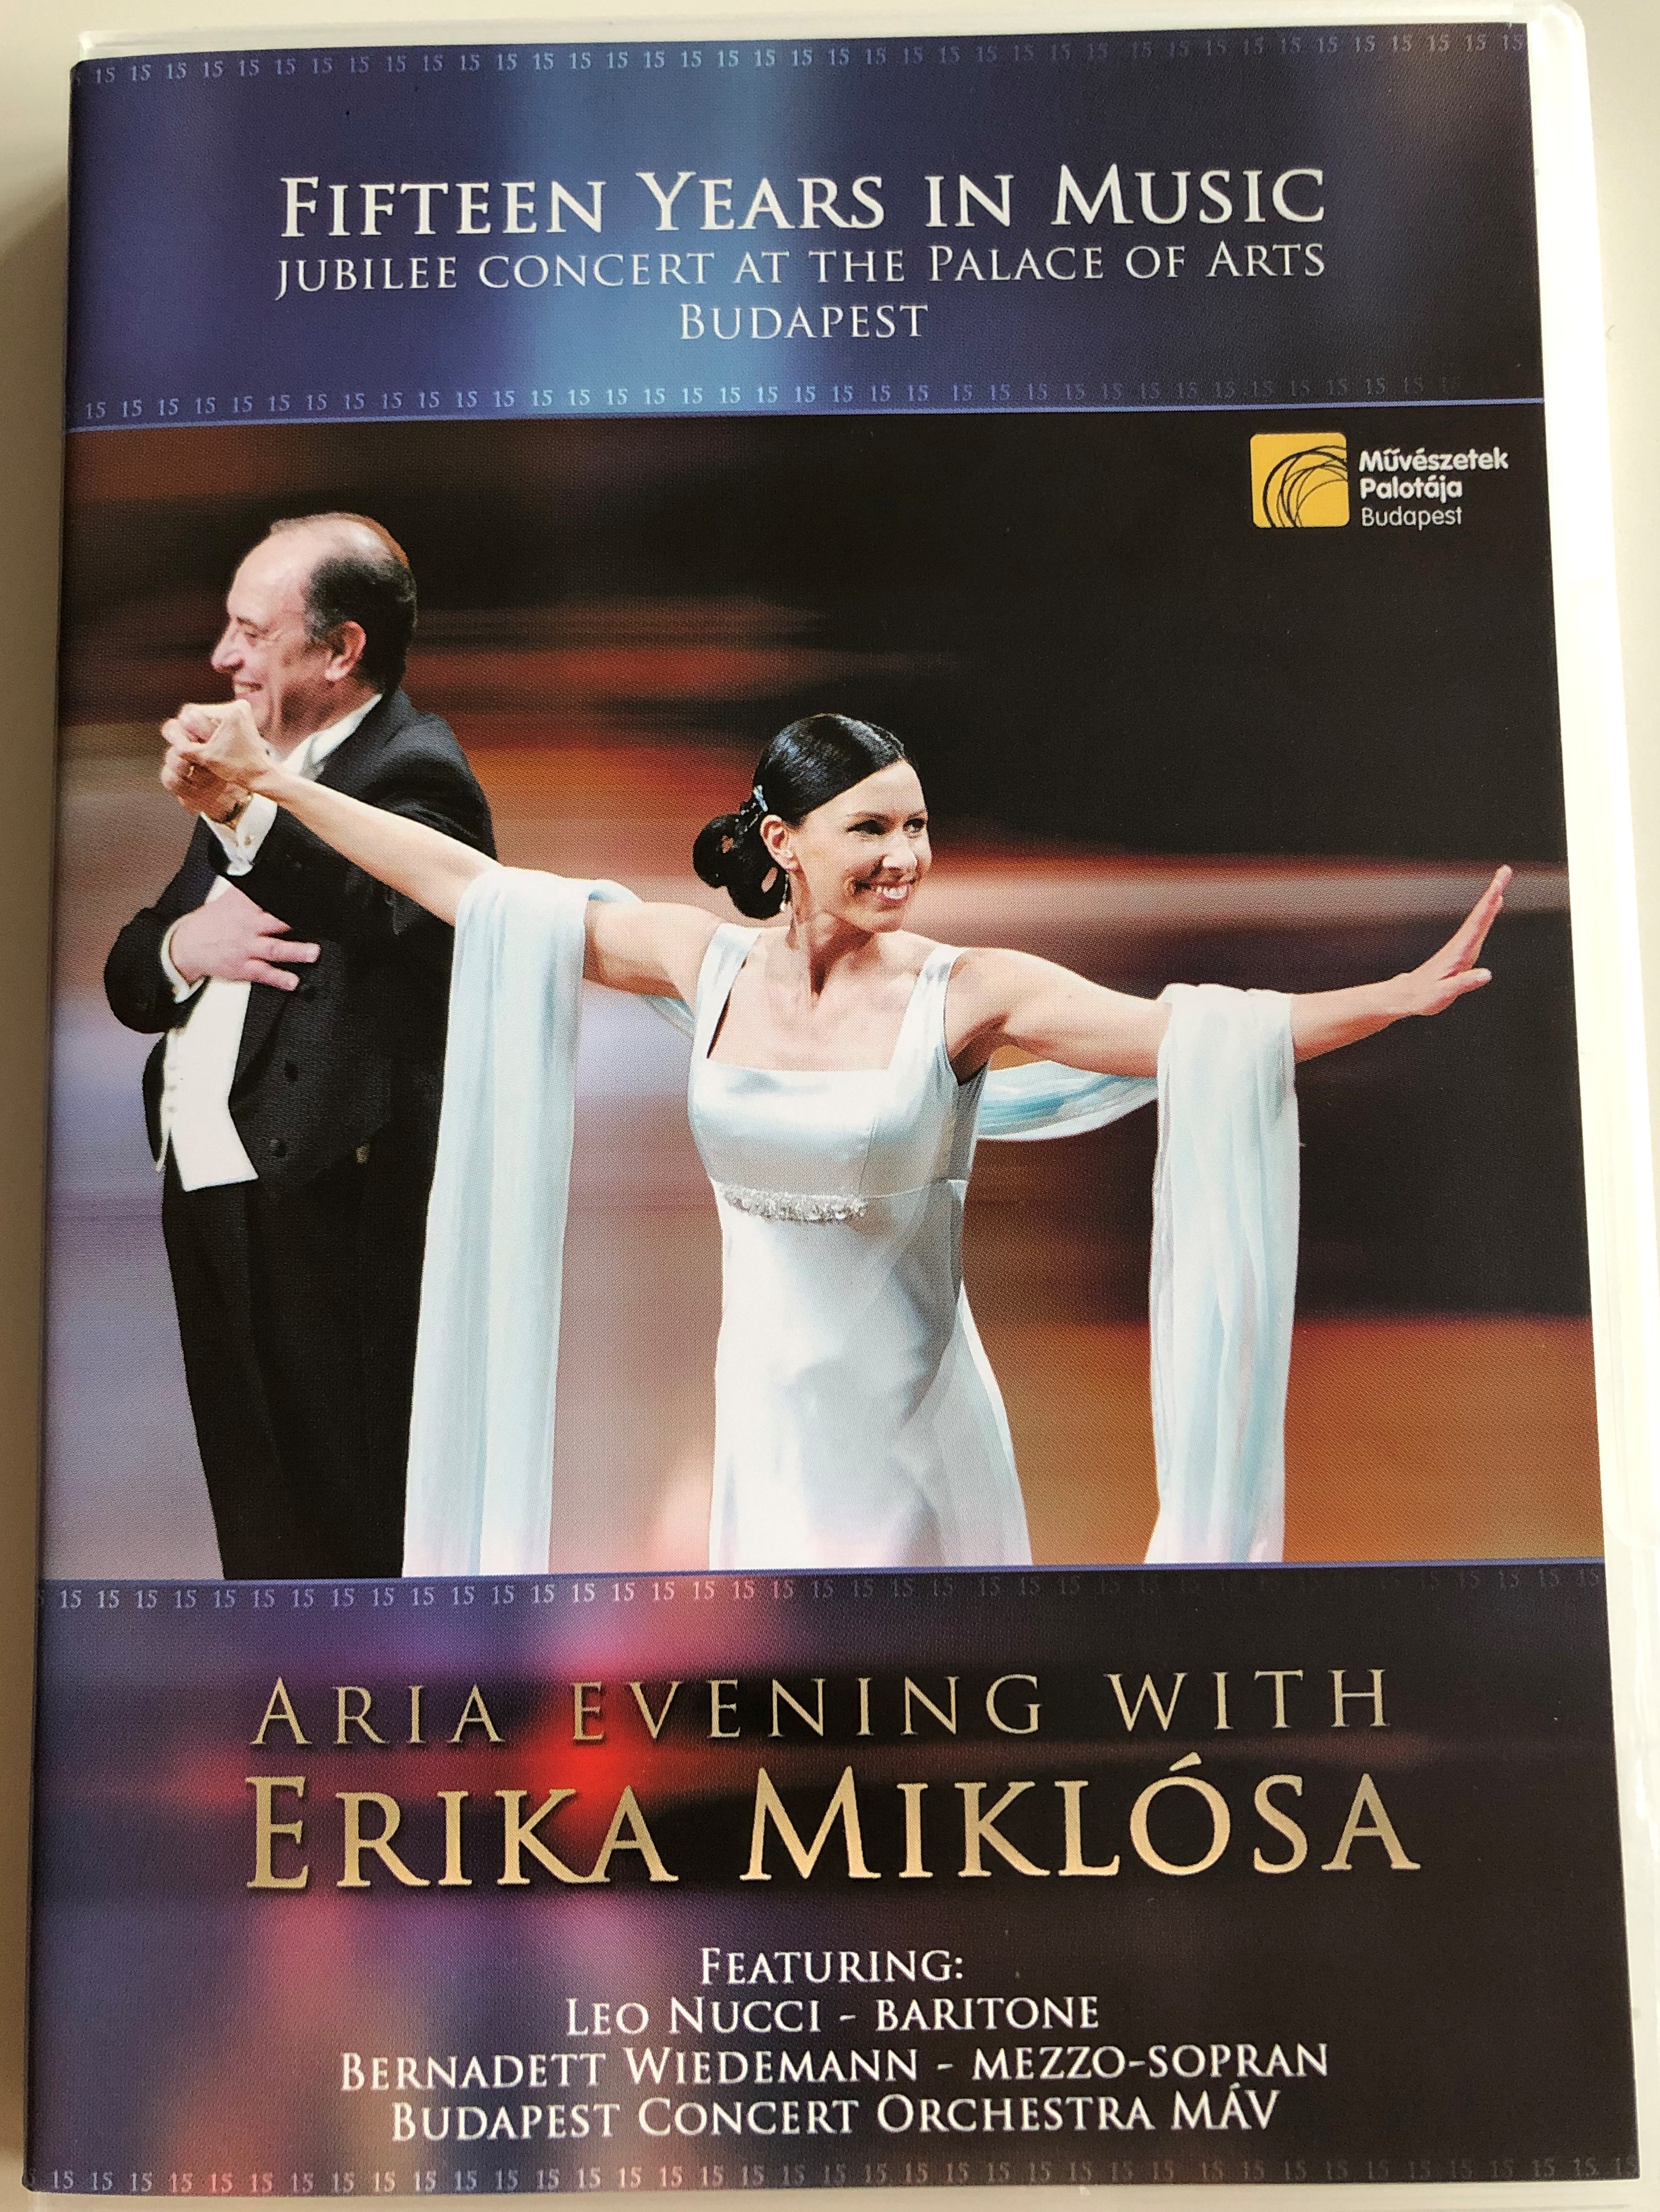 aria-evening-with-erika-mikl-sa-dvd-fifteen-years-in-music-jubilee-concert-at-the-palace-of-arts-budapest-1.jpg